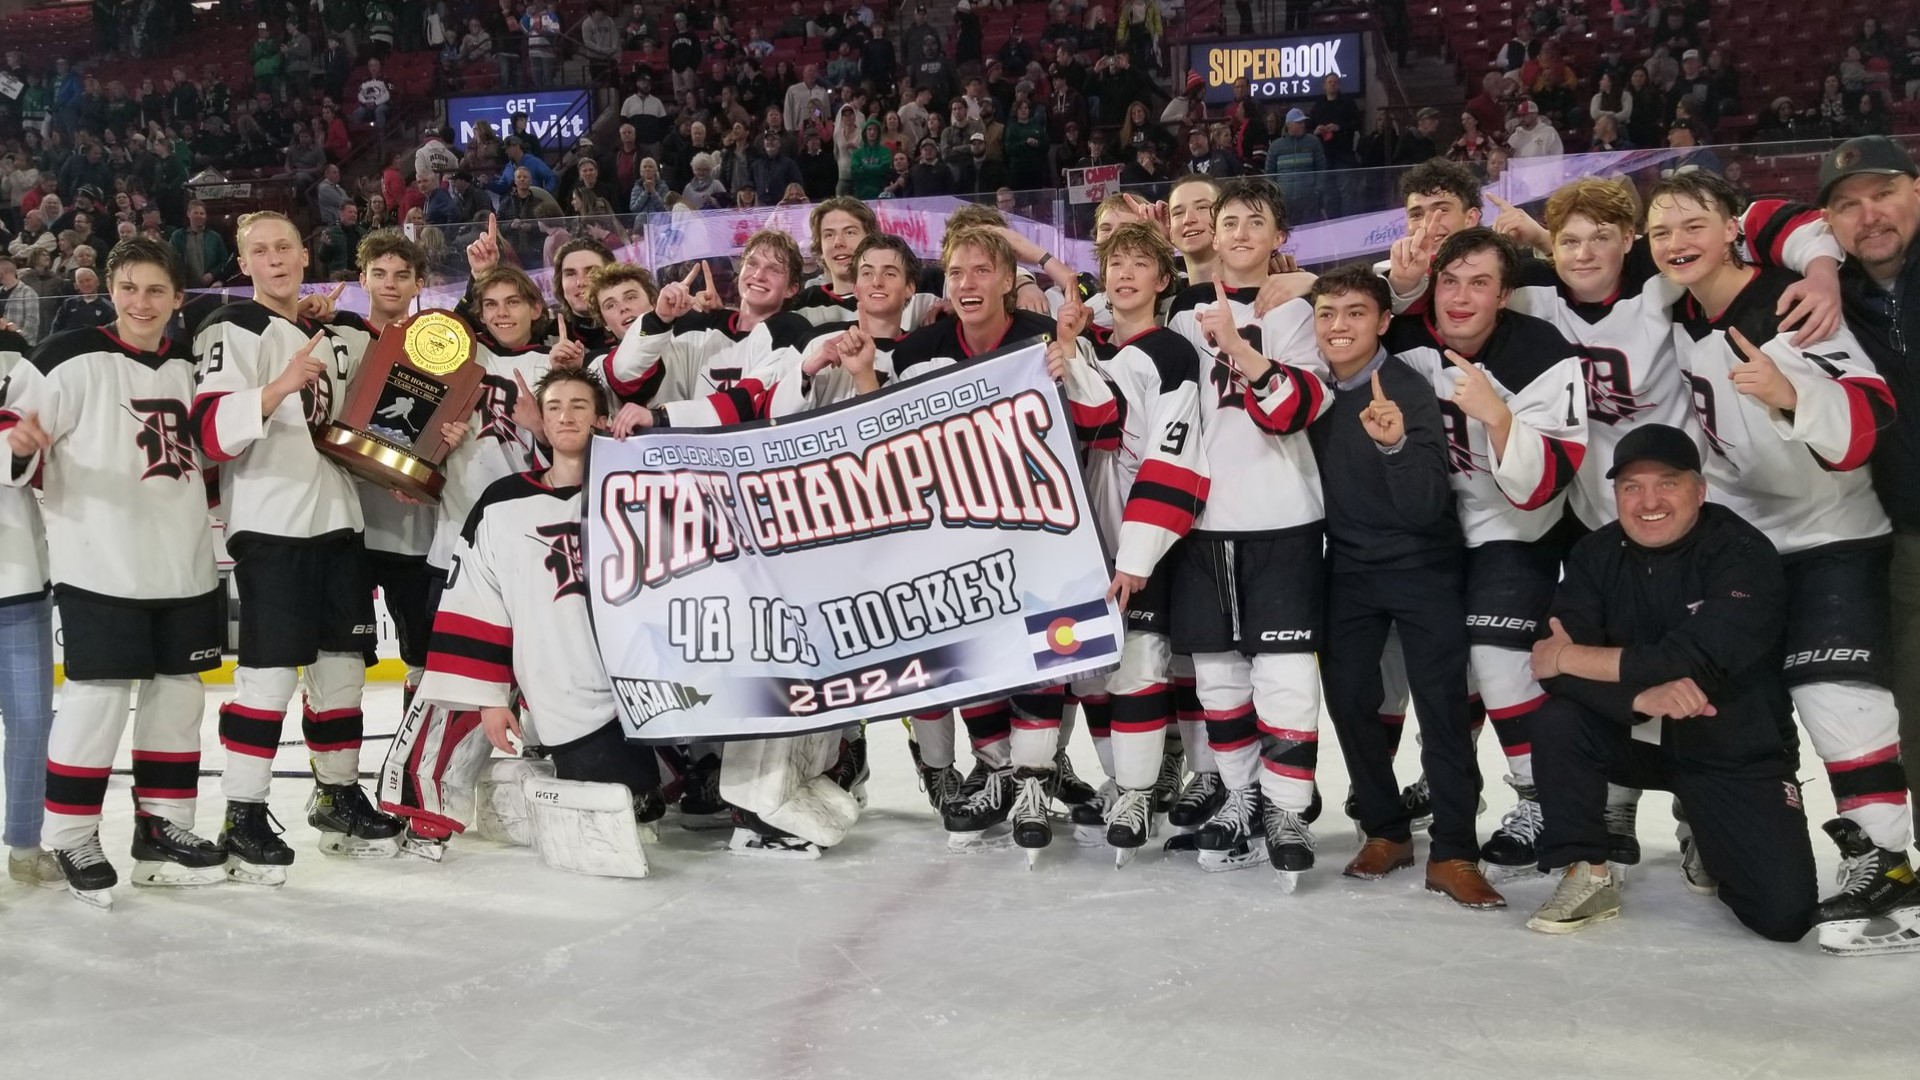 The Demons defeated the Summit Tigers 4-2 in the Class 4A championship game at DU's Magness Arena.